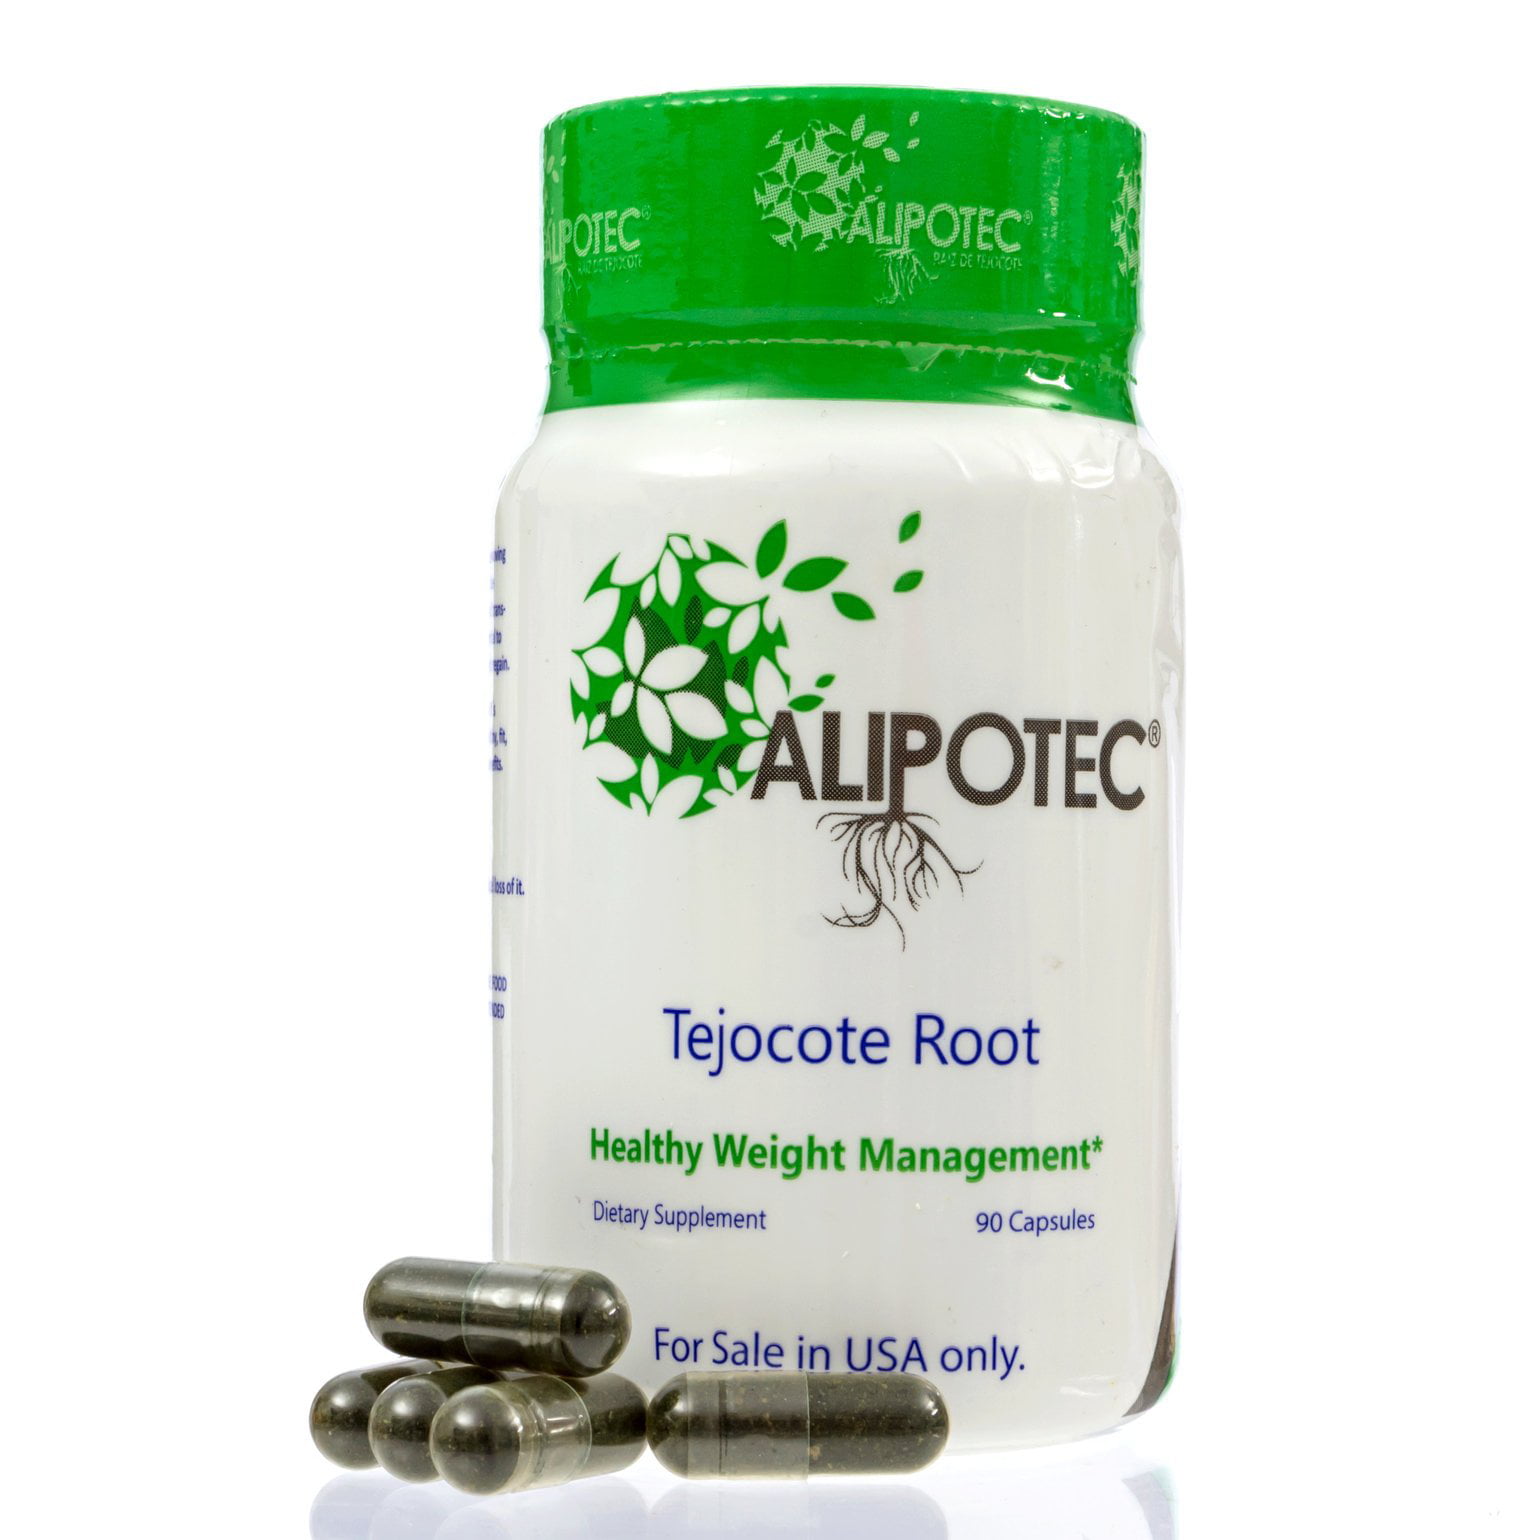 Alipotec Tejocote Root Weight Loss Supplement, 90 Capsules